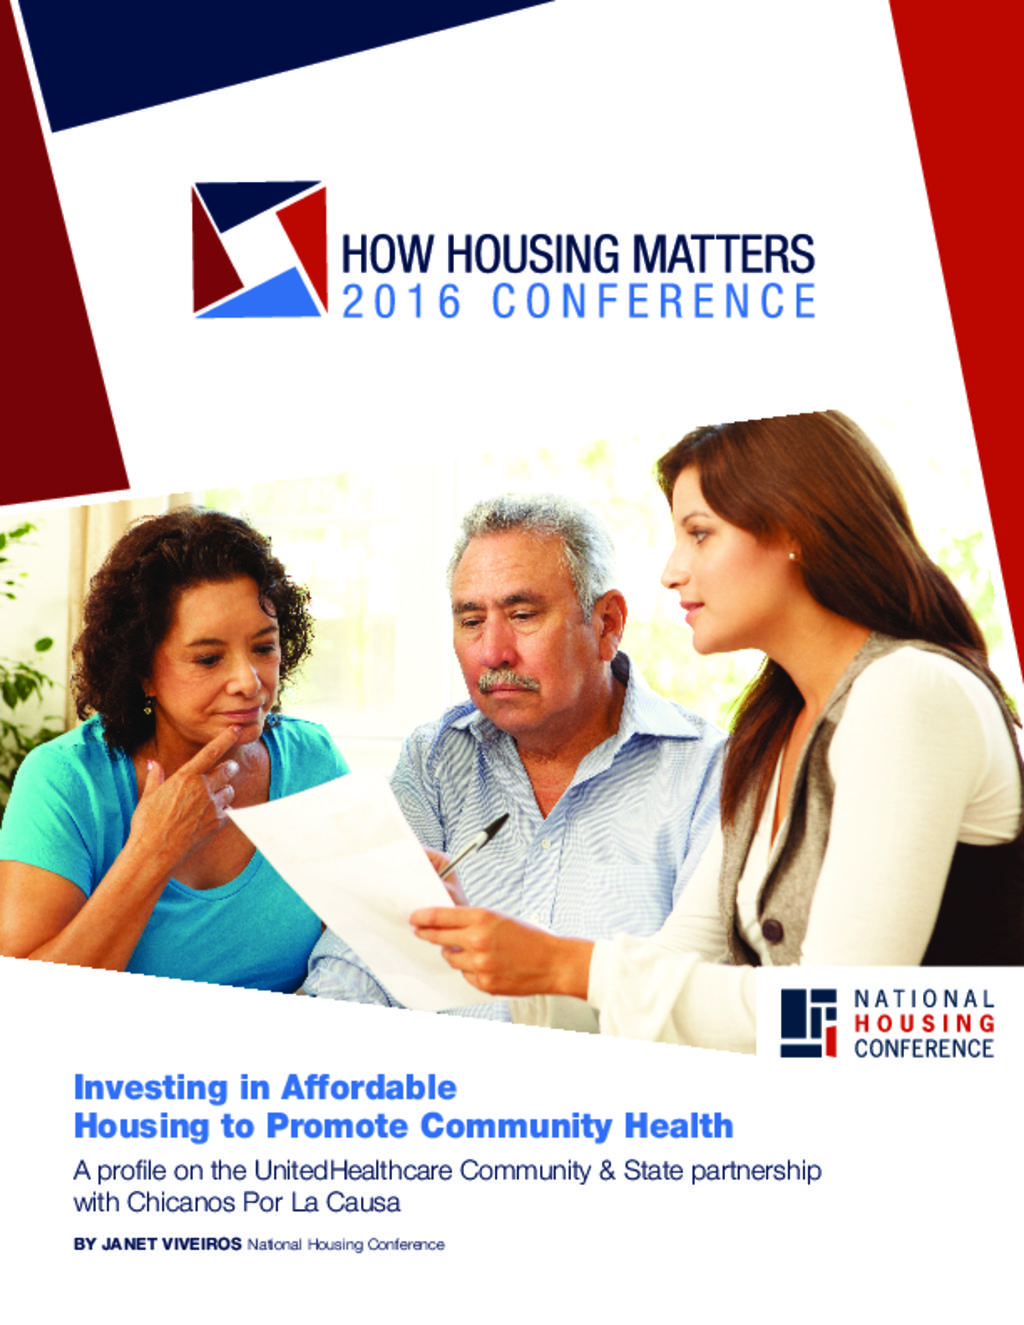 Investing in Affordable Housing to Promote Community Health